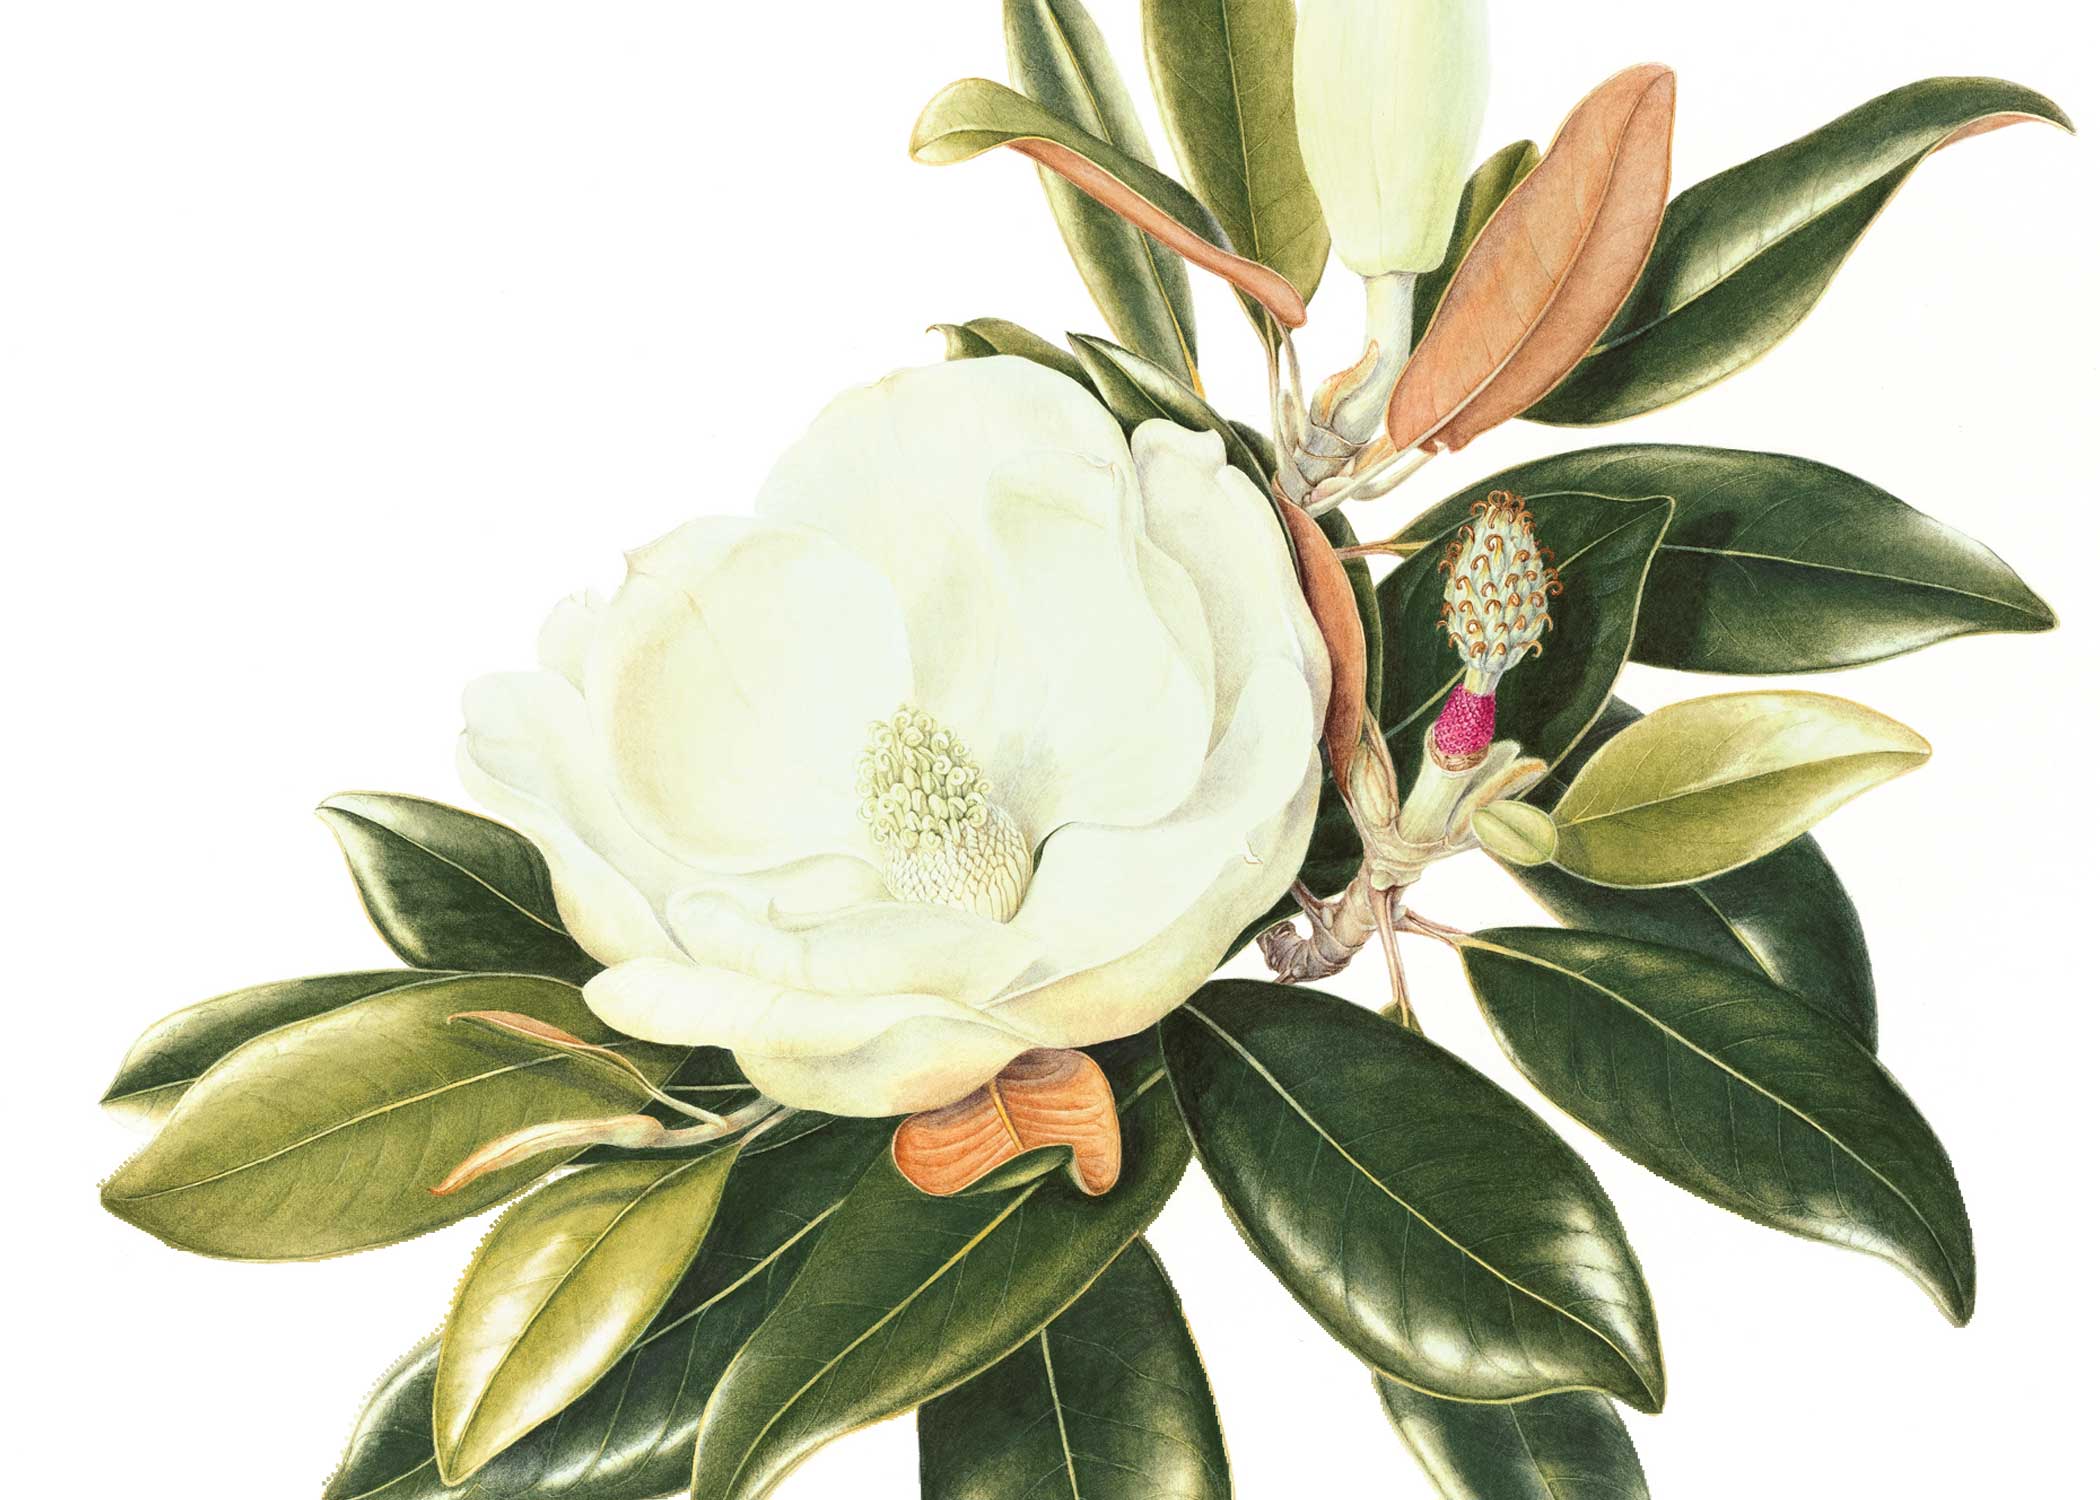 "Southern Magnolia" by Beverly Allen